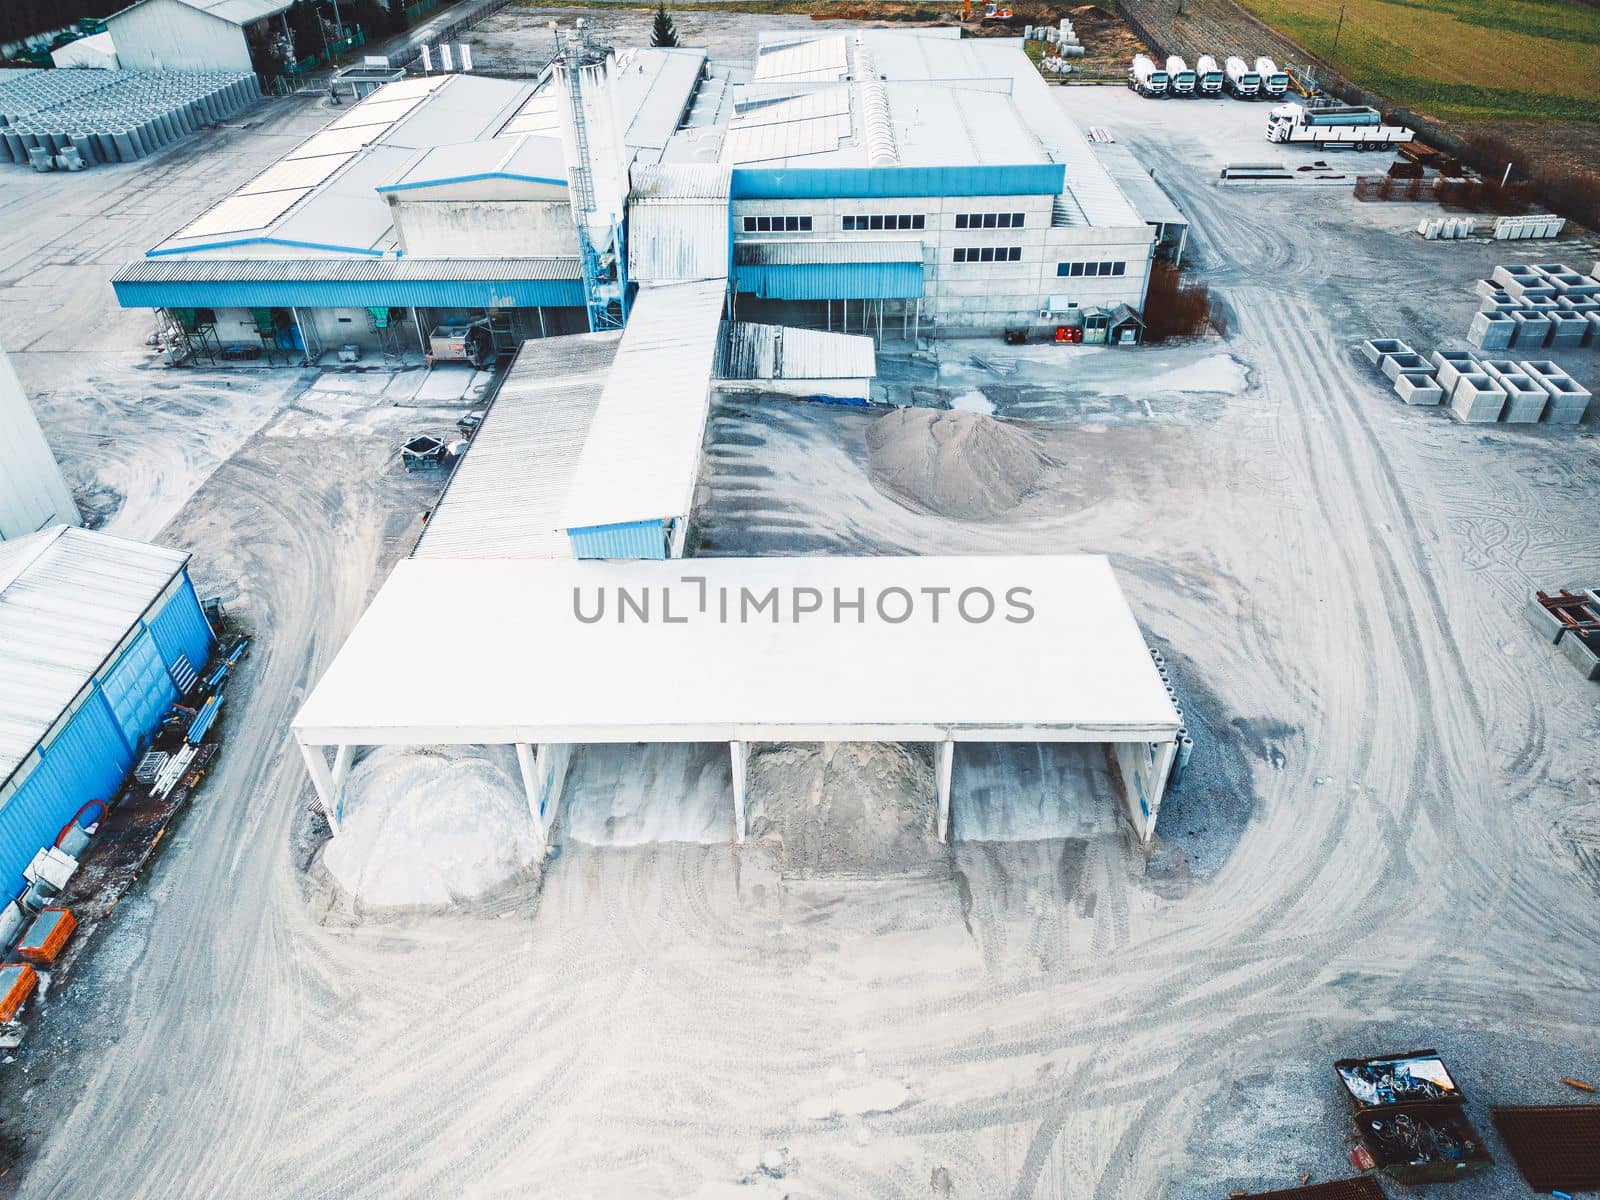 Gravel being stored under the roof at road repair center by VisualProductions